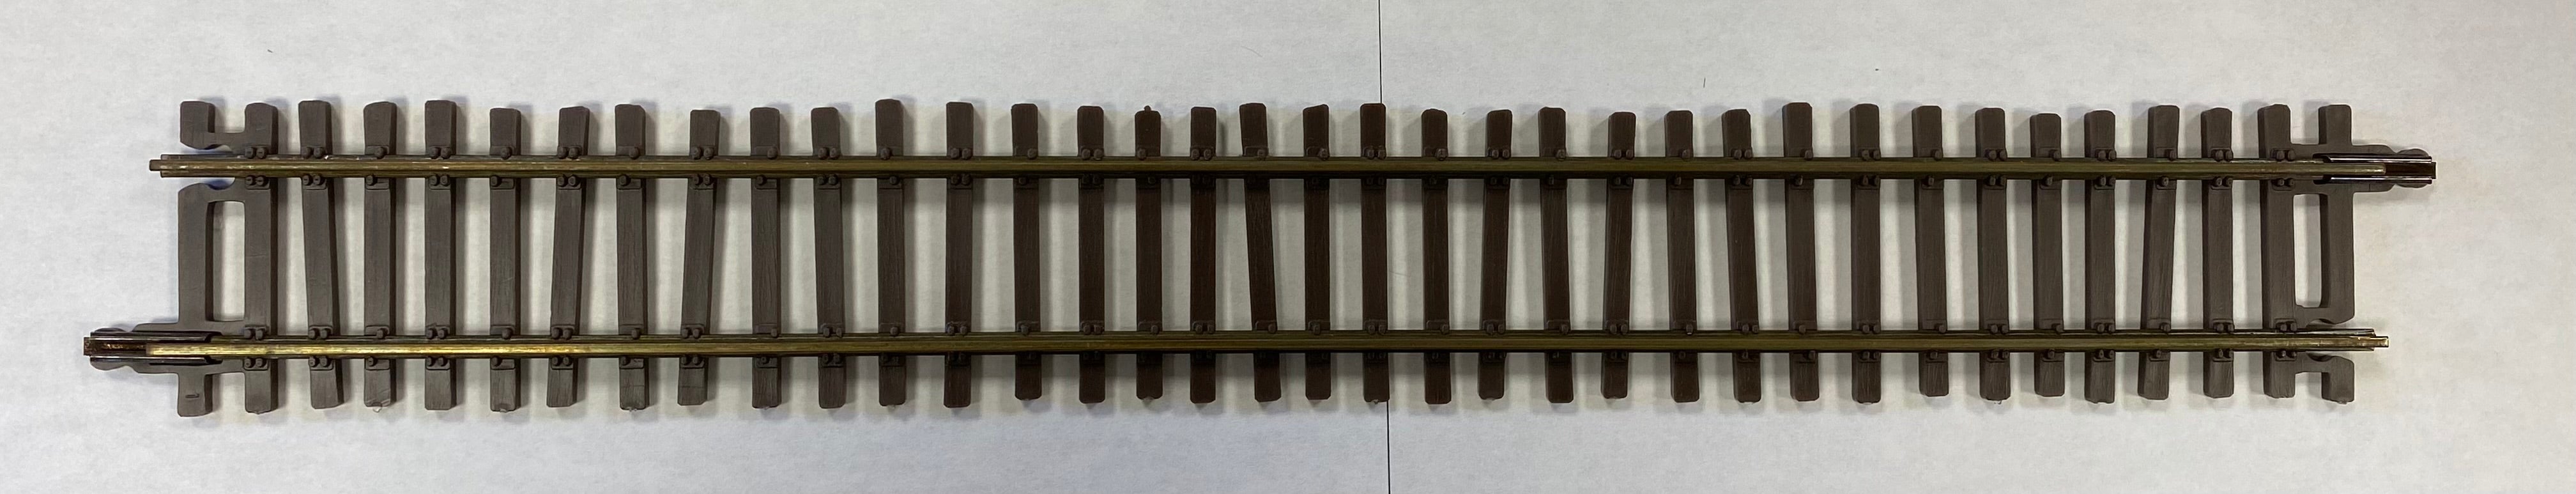 T14812, 12-inch Straight Track